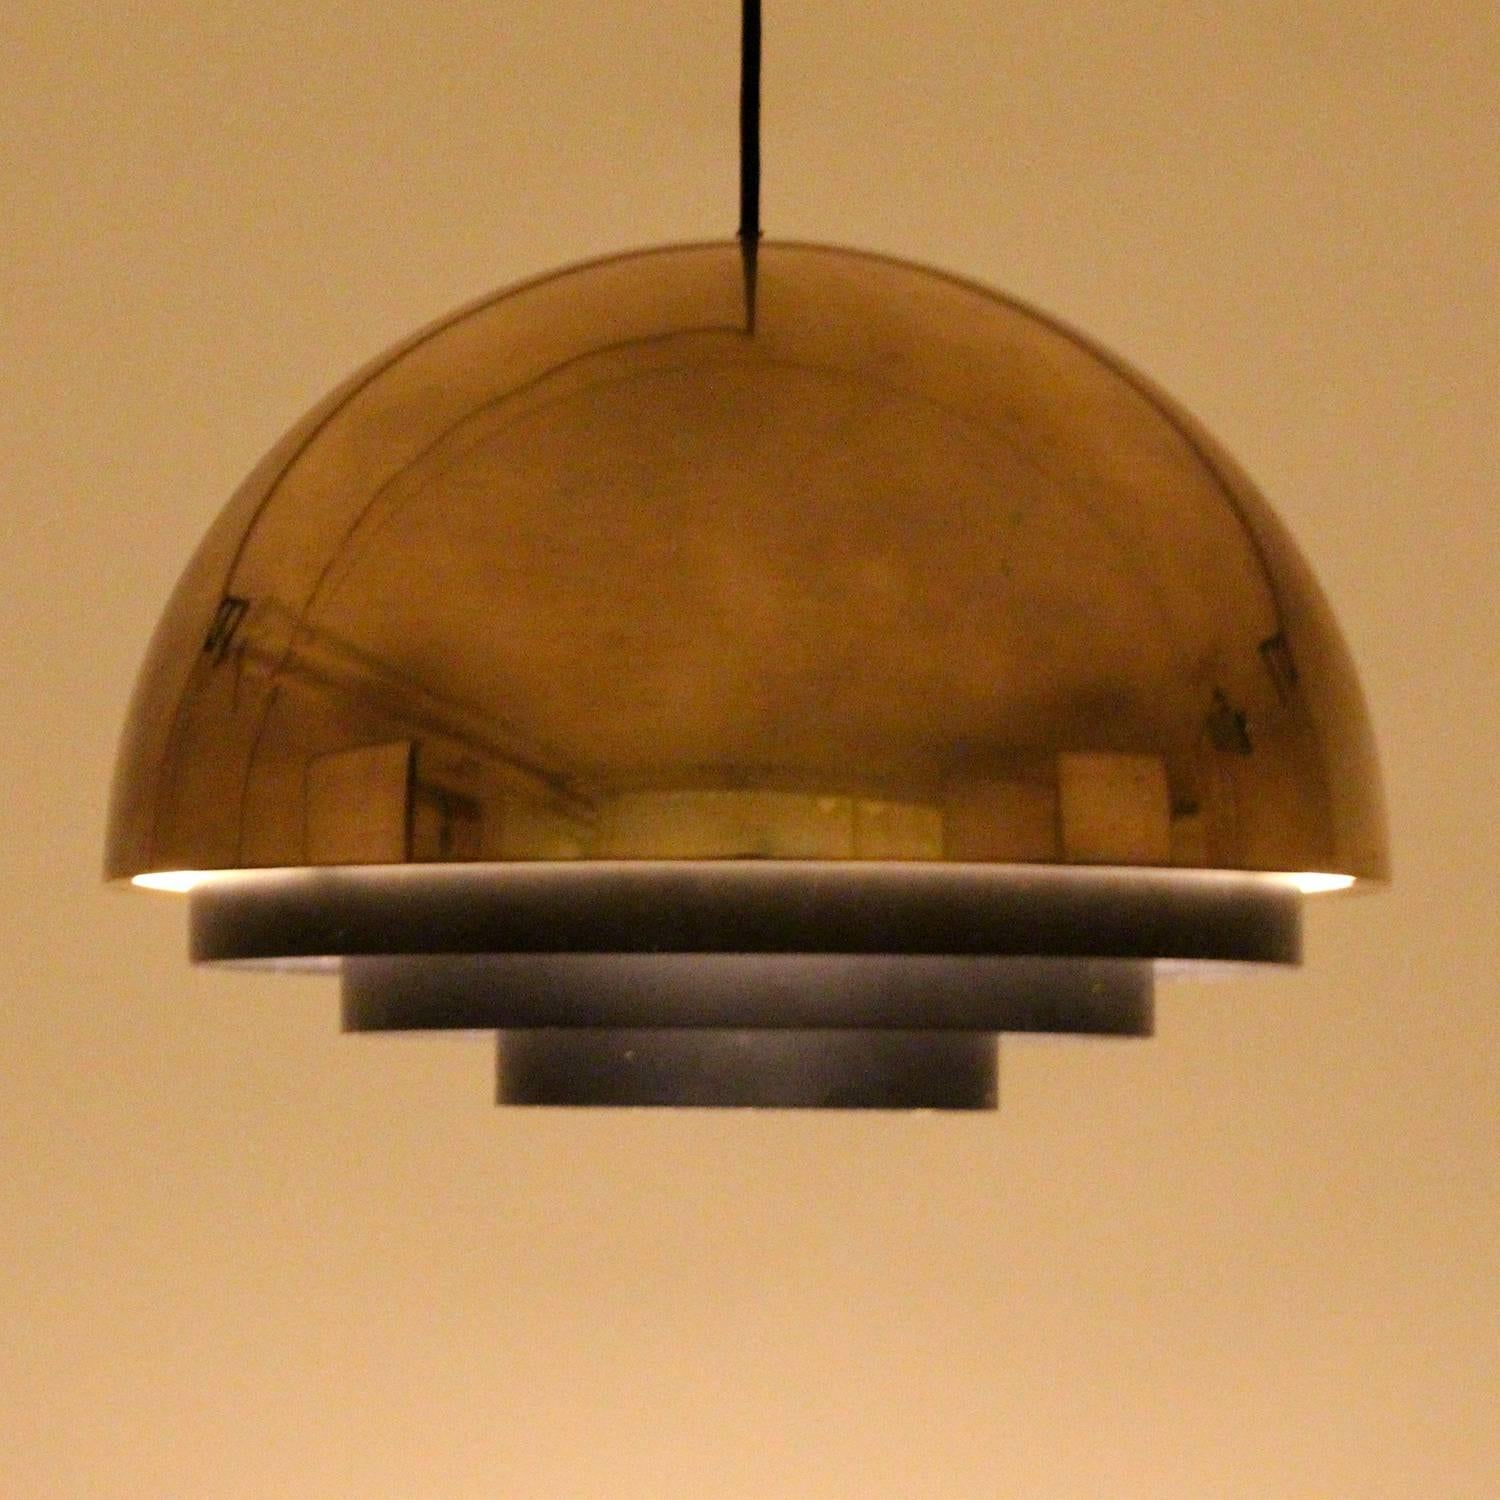 Milieu Maxi pendant designed by Jo Hammerborg for Fog and Mørup in the mid-1970s - beautiful large vintage gold-plated hanging lamp with black diffuser in good vintage condition.

A large gold-plated metal pendant shaped of a half circle with